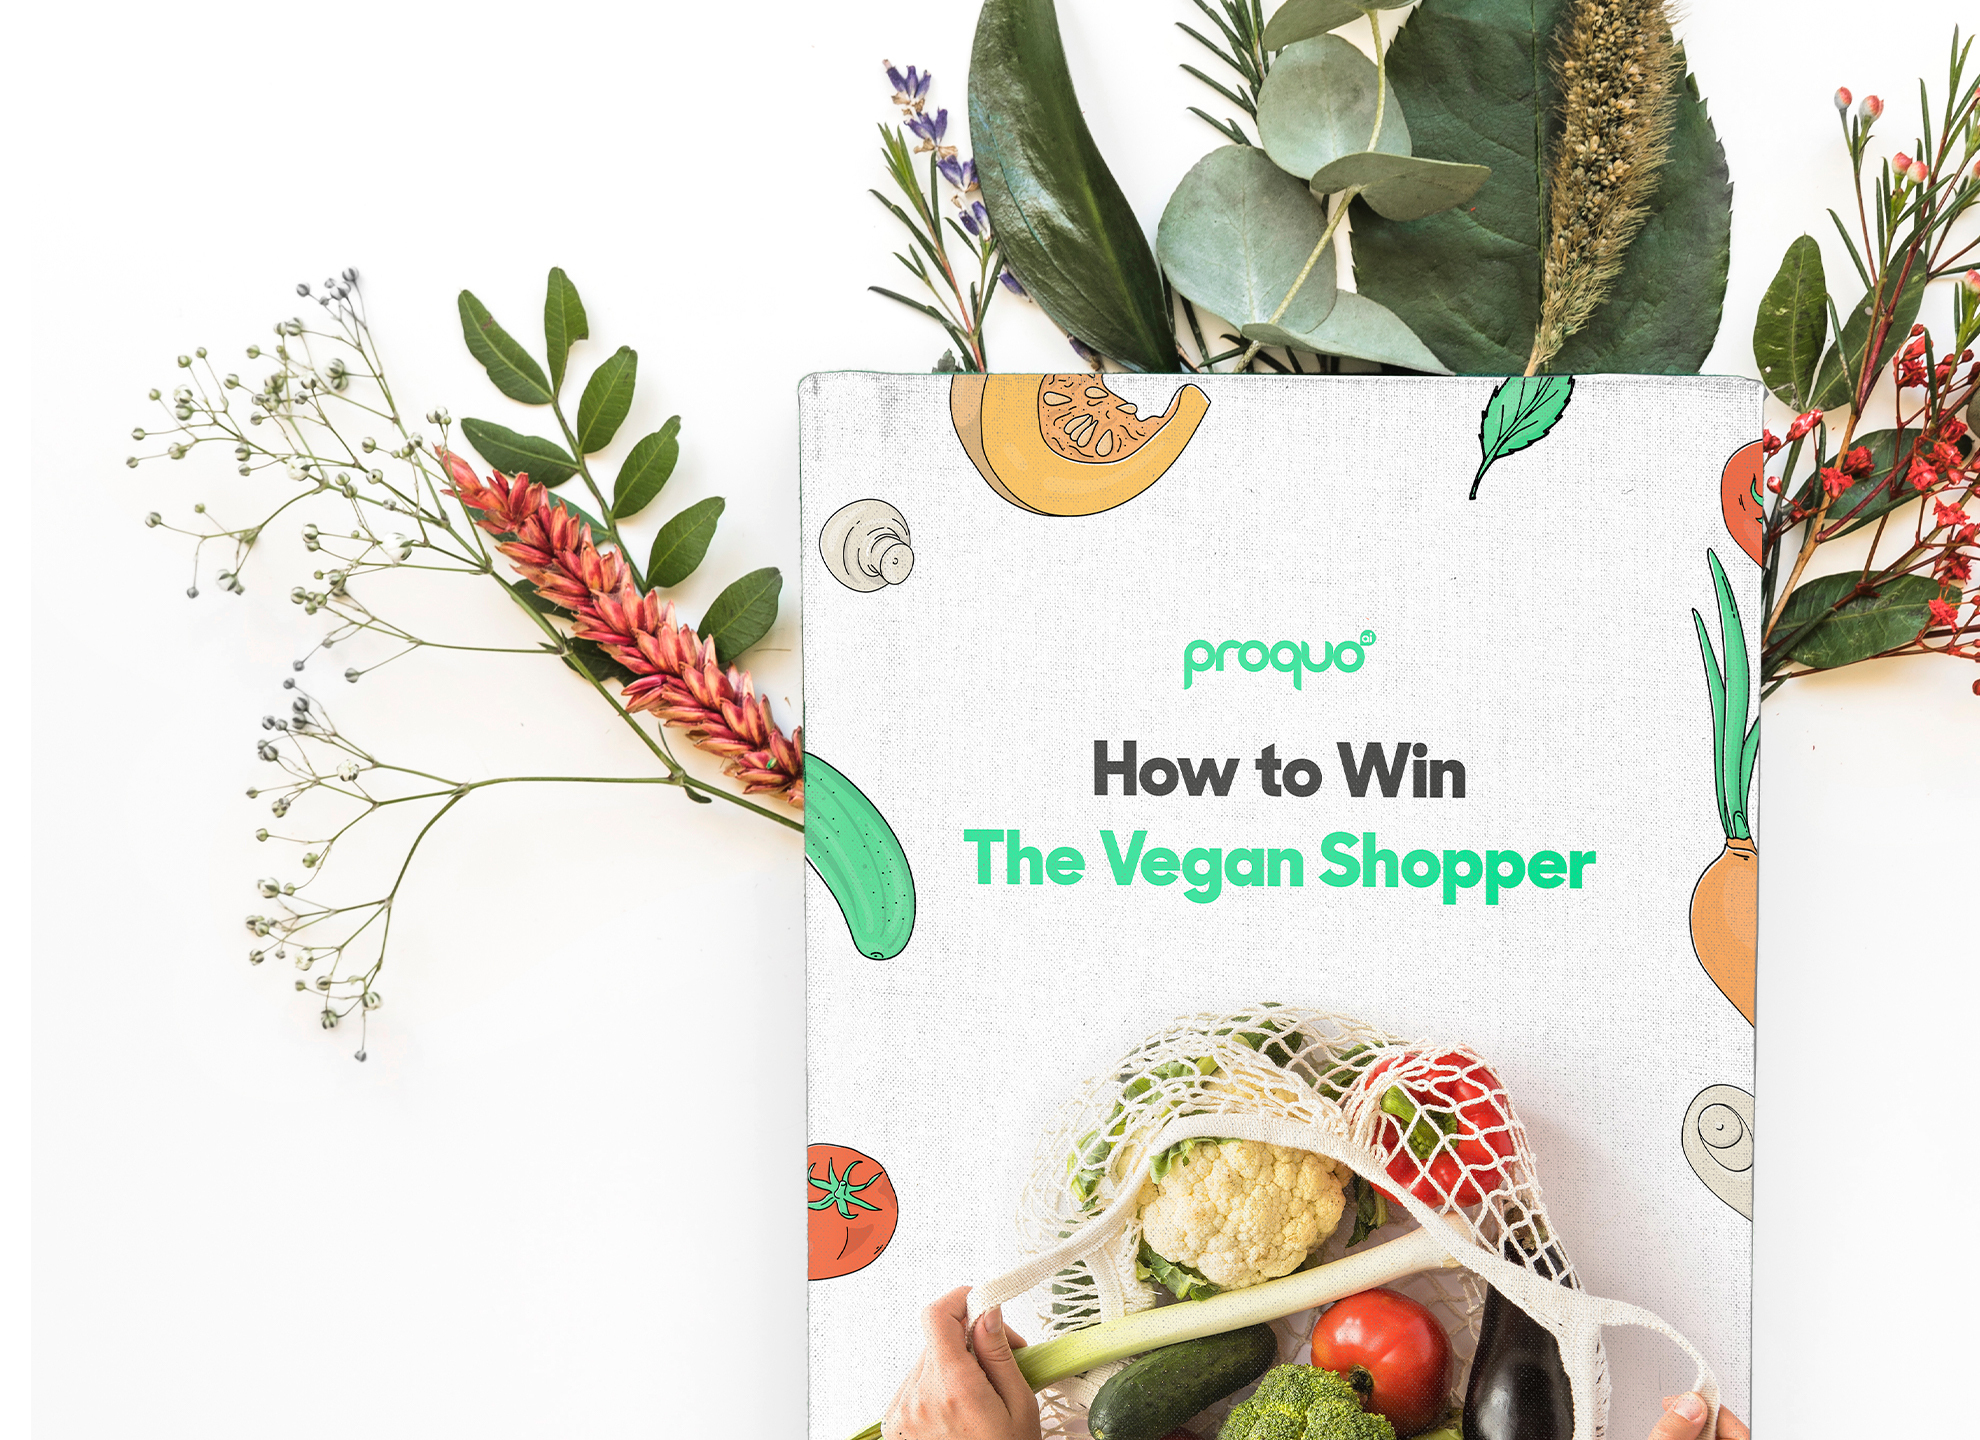 What's Driving the Vegan Market? Brand Infographic